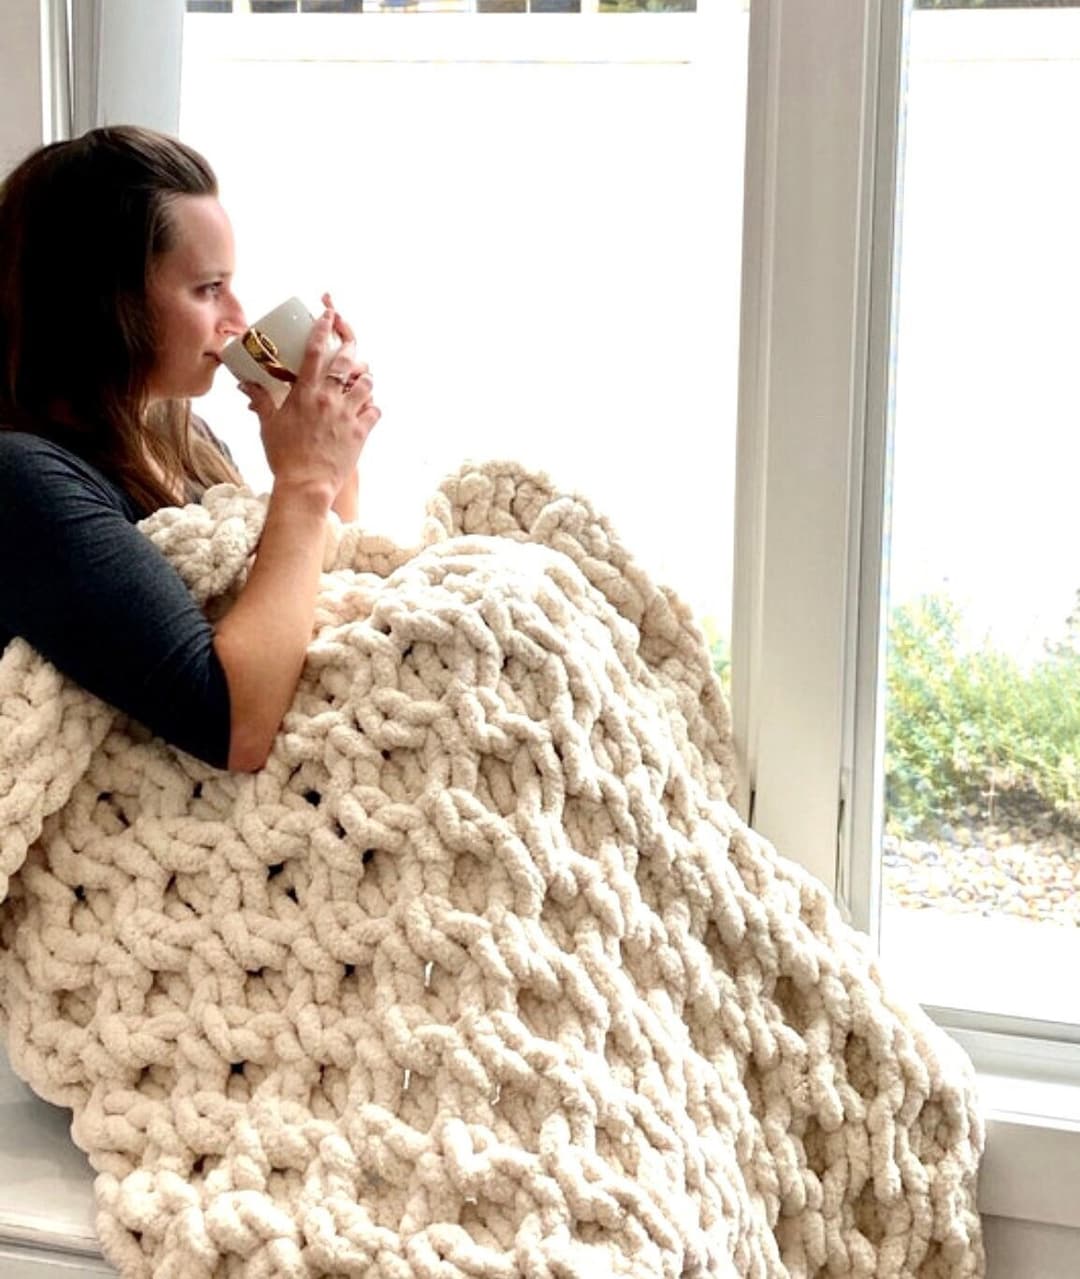 CHUNKY WOOL KNIT BLANKET KIT : How to make the most insanely beautiful chunky  knit blanket in the history of ever